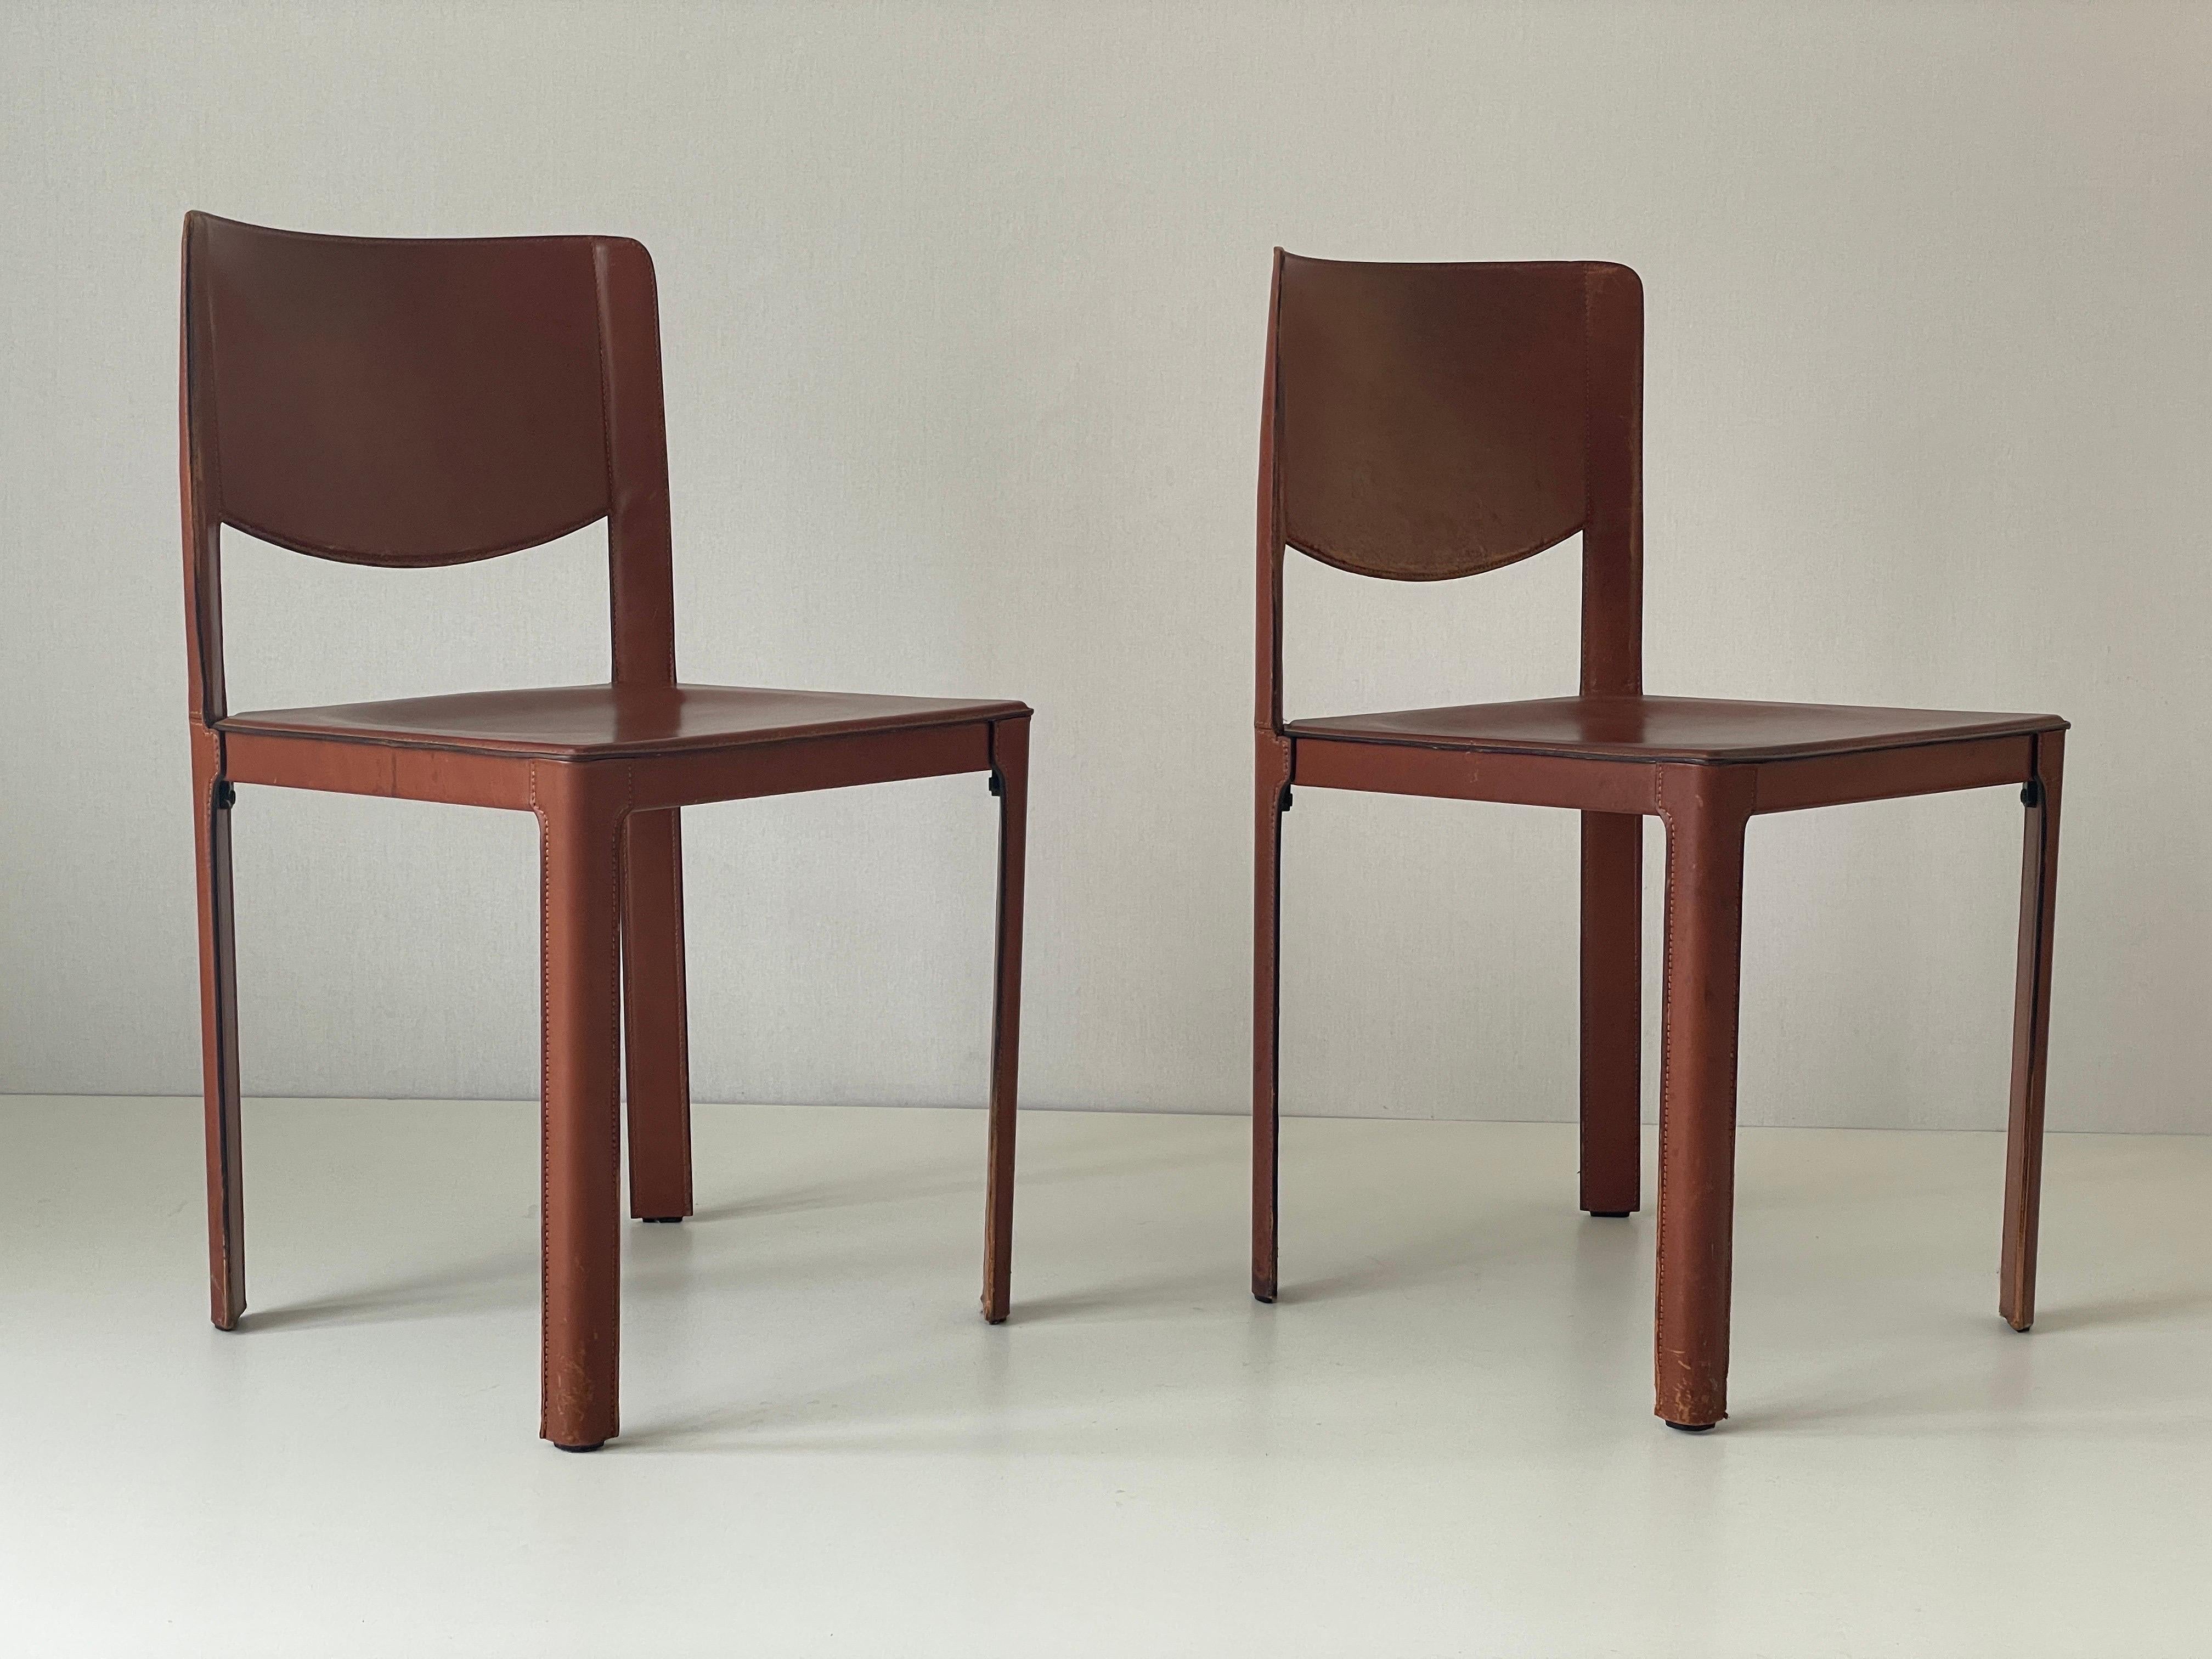 Pair of Italian Brown Leather Chairs by Matteo Grassi, 1970s, Italy For Sale 5